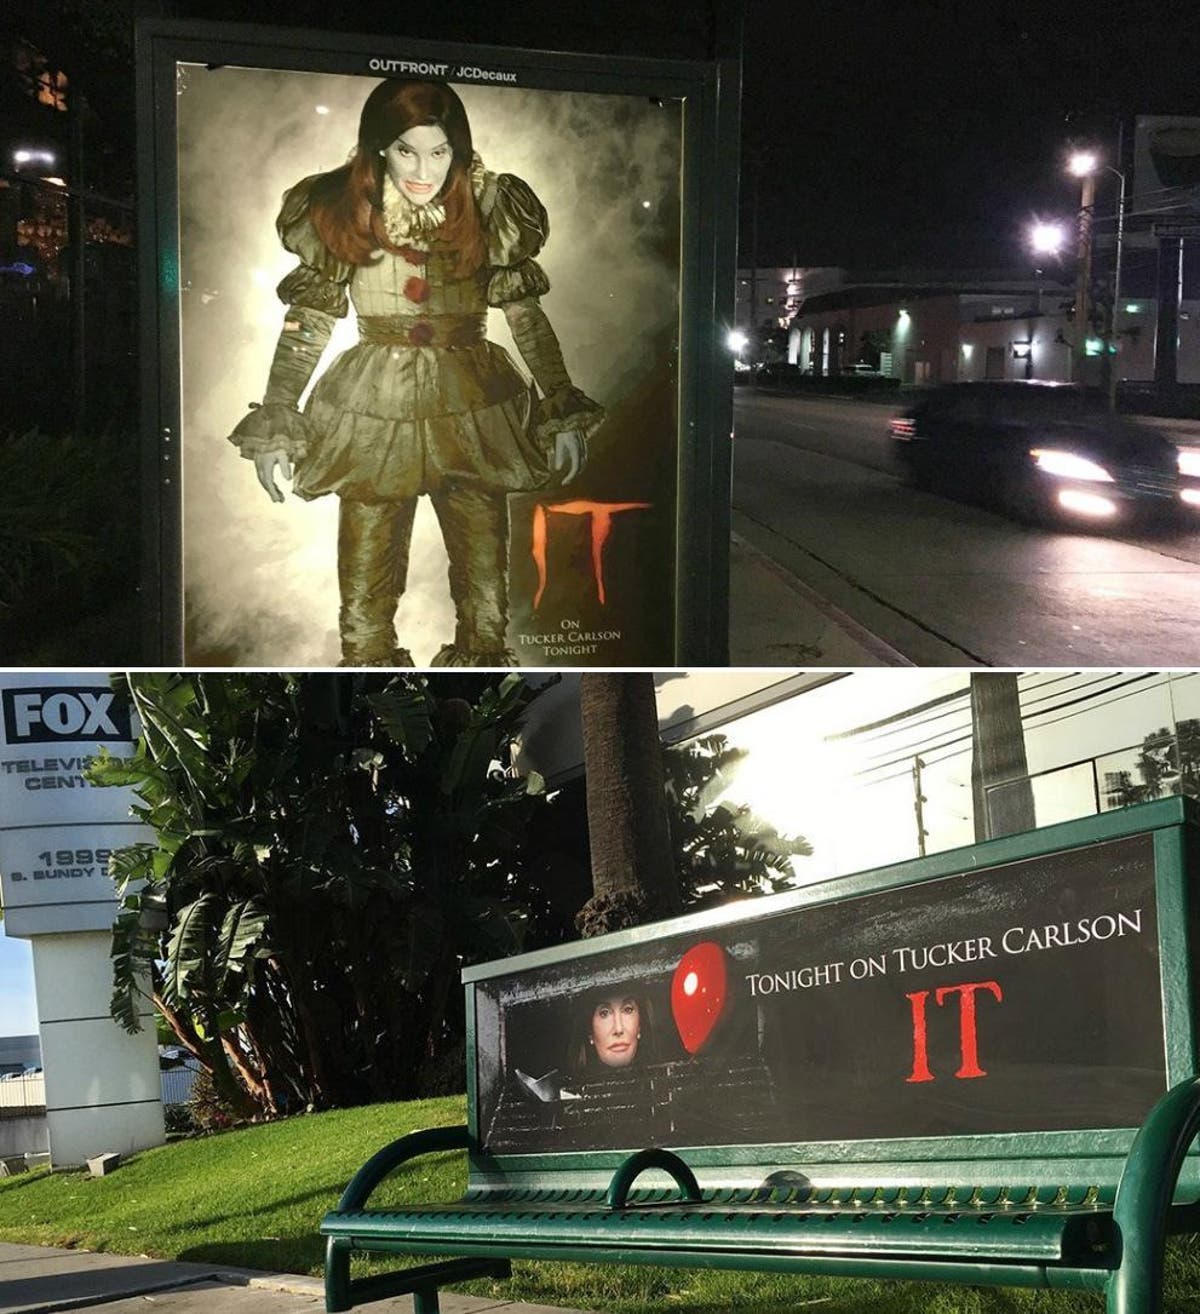 'LA's only right wing street artist' puts Caitlyn Jenner in It the Clown adverts around Hollywood